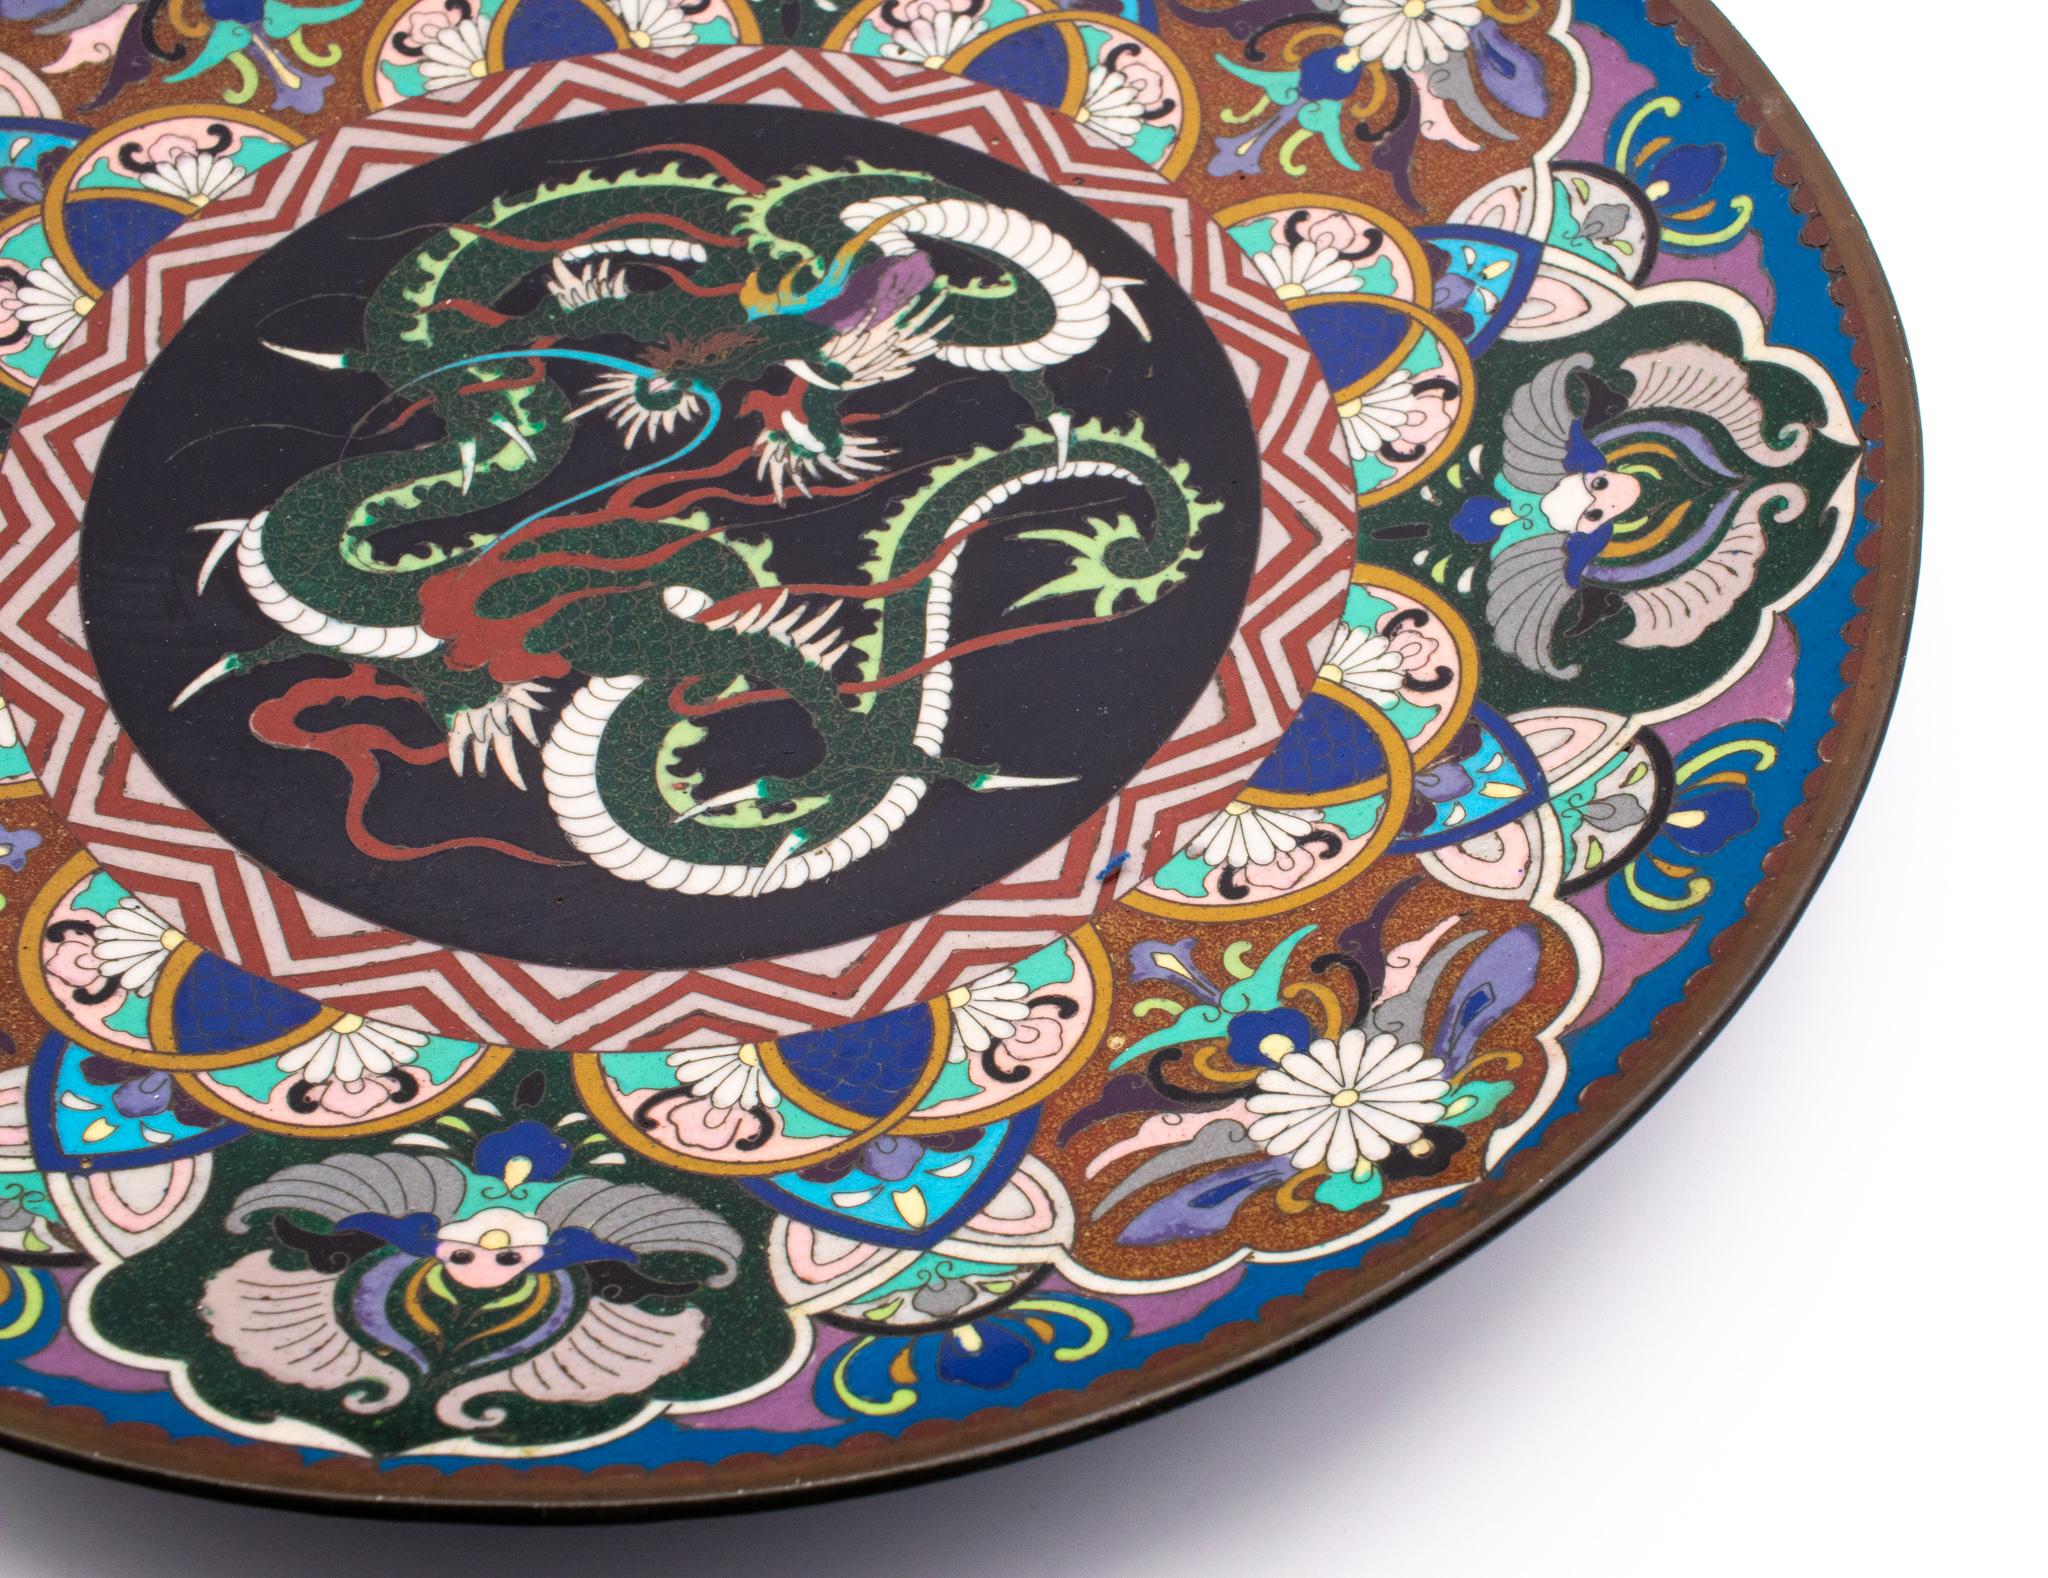 Large charger in cloisonné from imperial Japan.

Beautiful piece of Japanese decorative arts, created during the Meiji imperial period, circa 1900. Crafted in solid bronze with copper wires and cloisonné color enamels. The predominant colors are